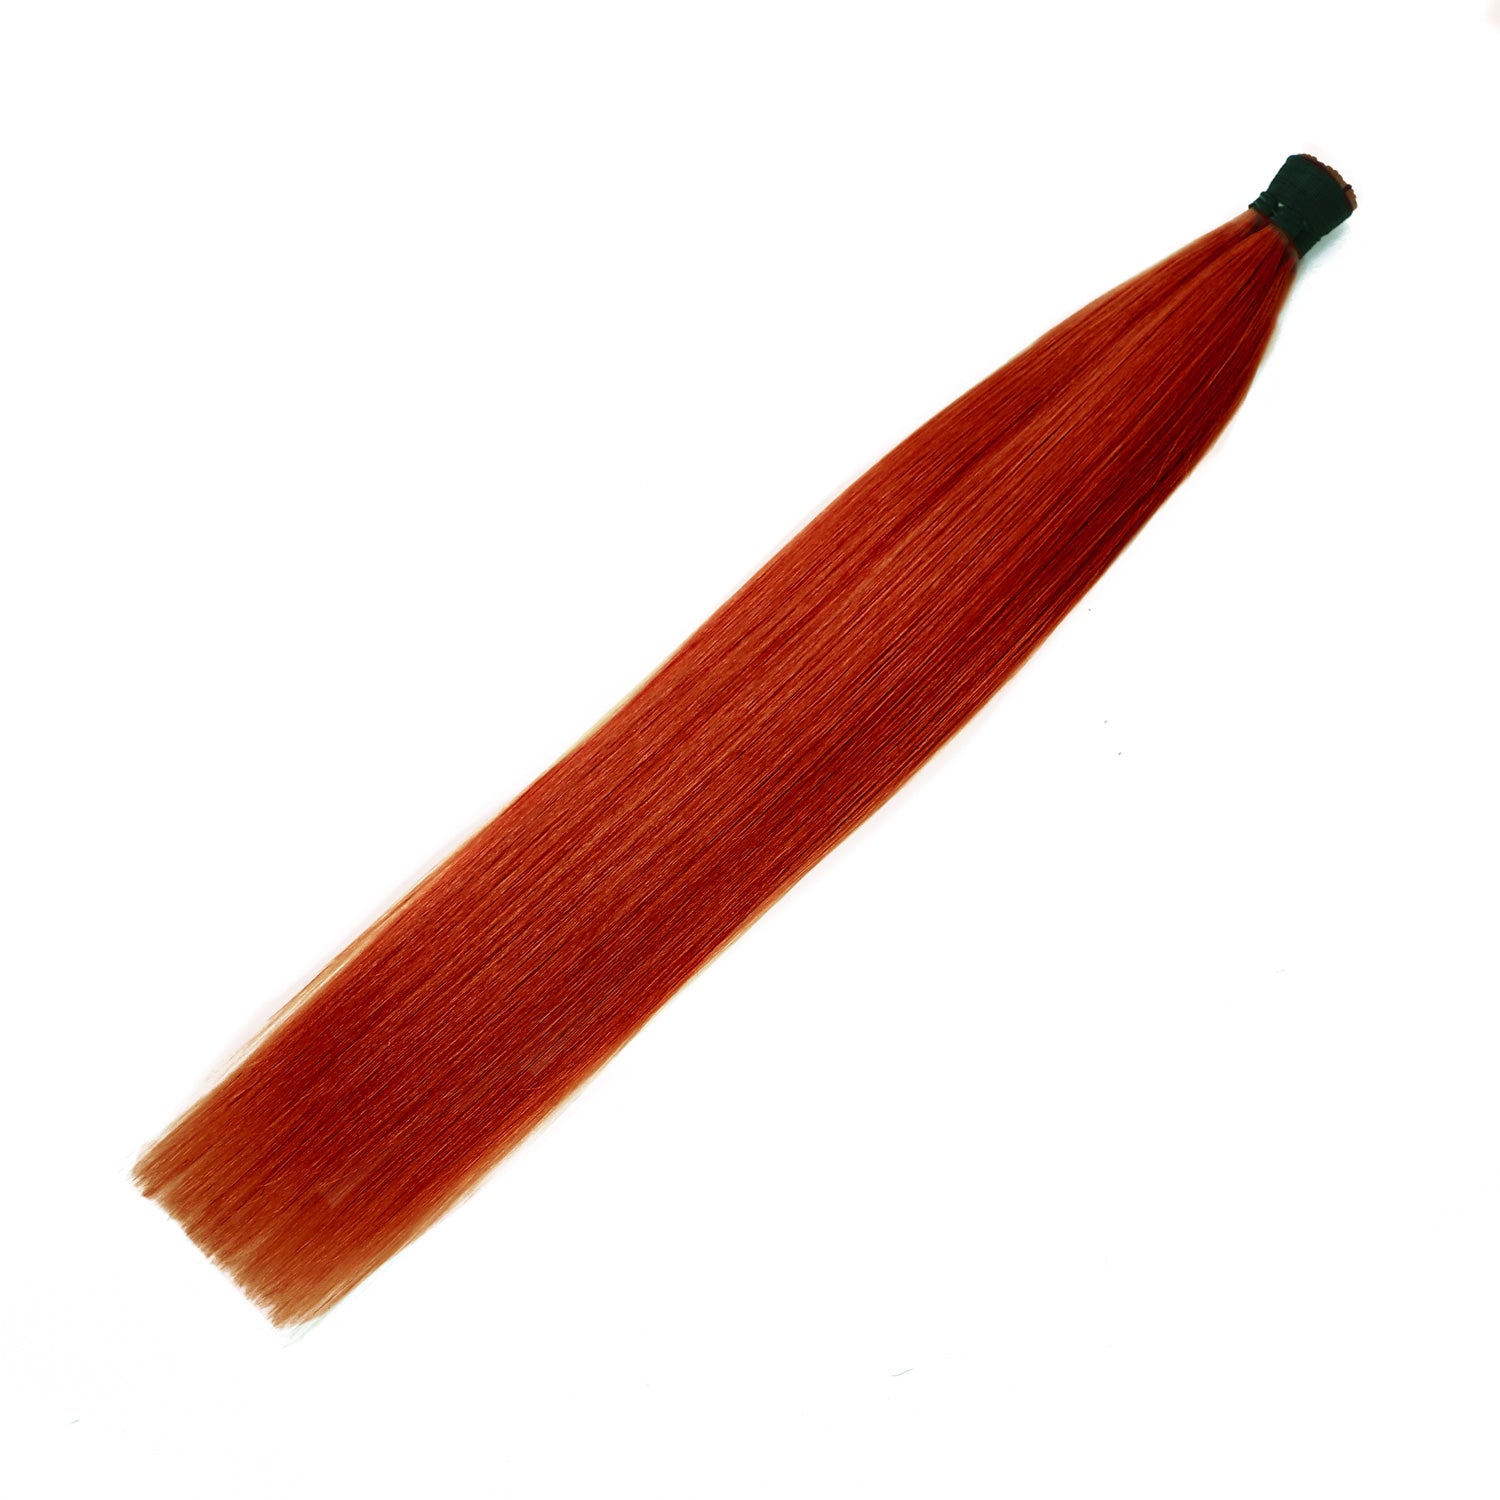 Micro Bead Hair Extensions I Tip #350 Copper